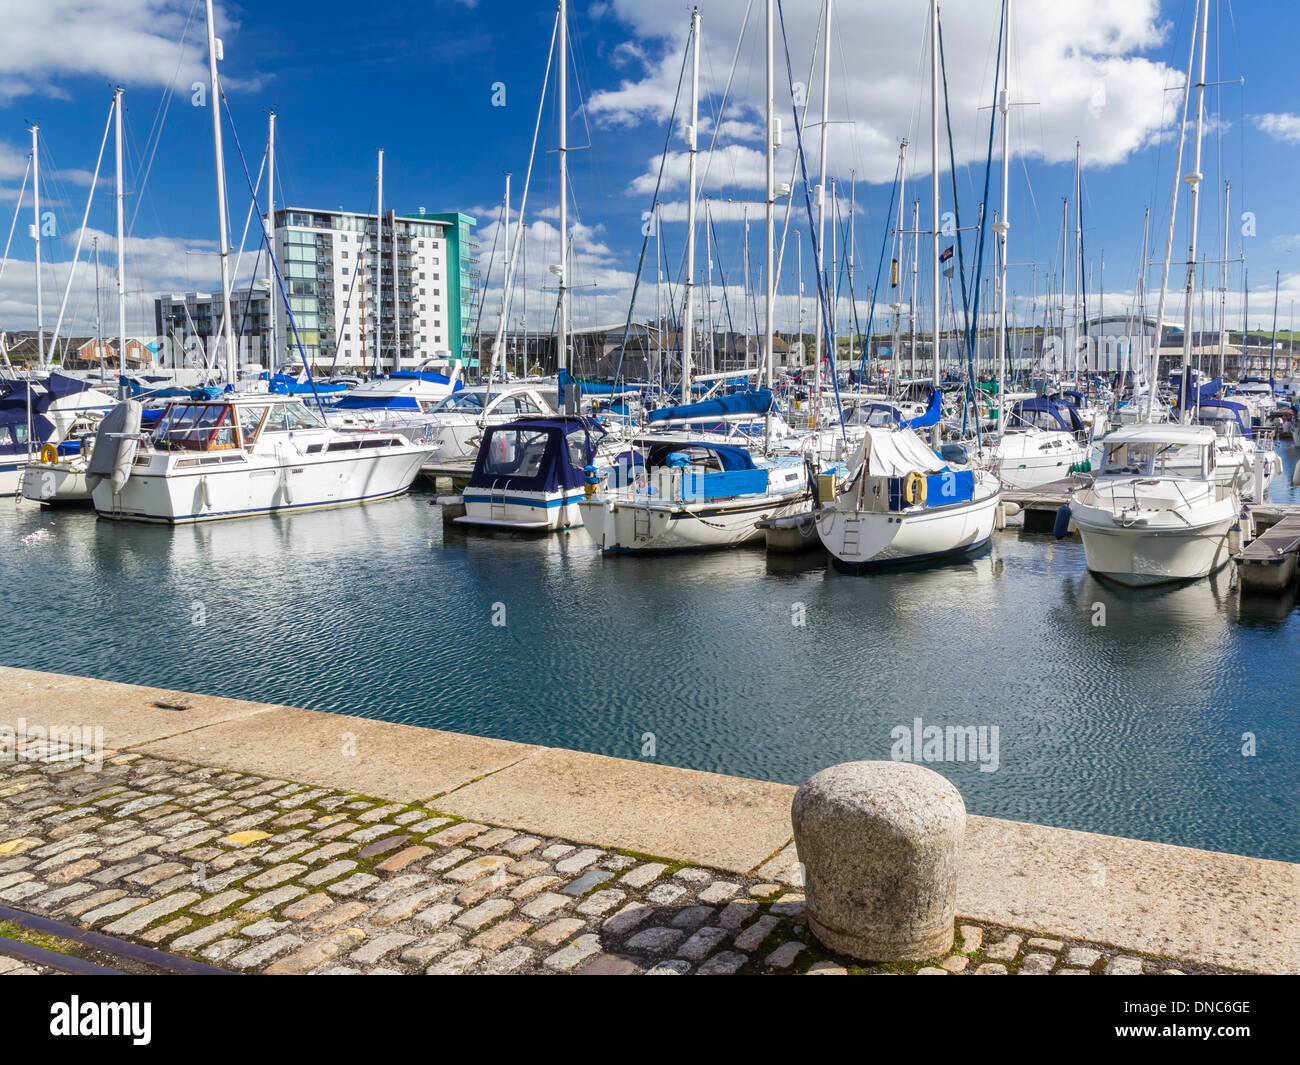 Boats in Sutton Harbour Marina Plymouth Devon England UK Europe Stock Photo